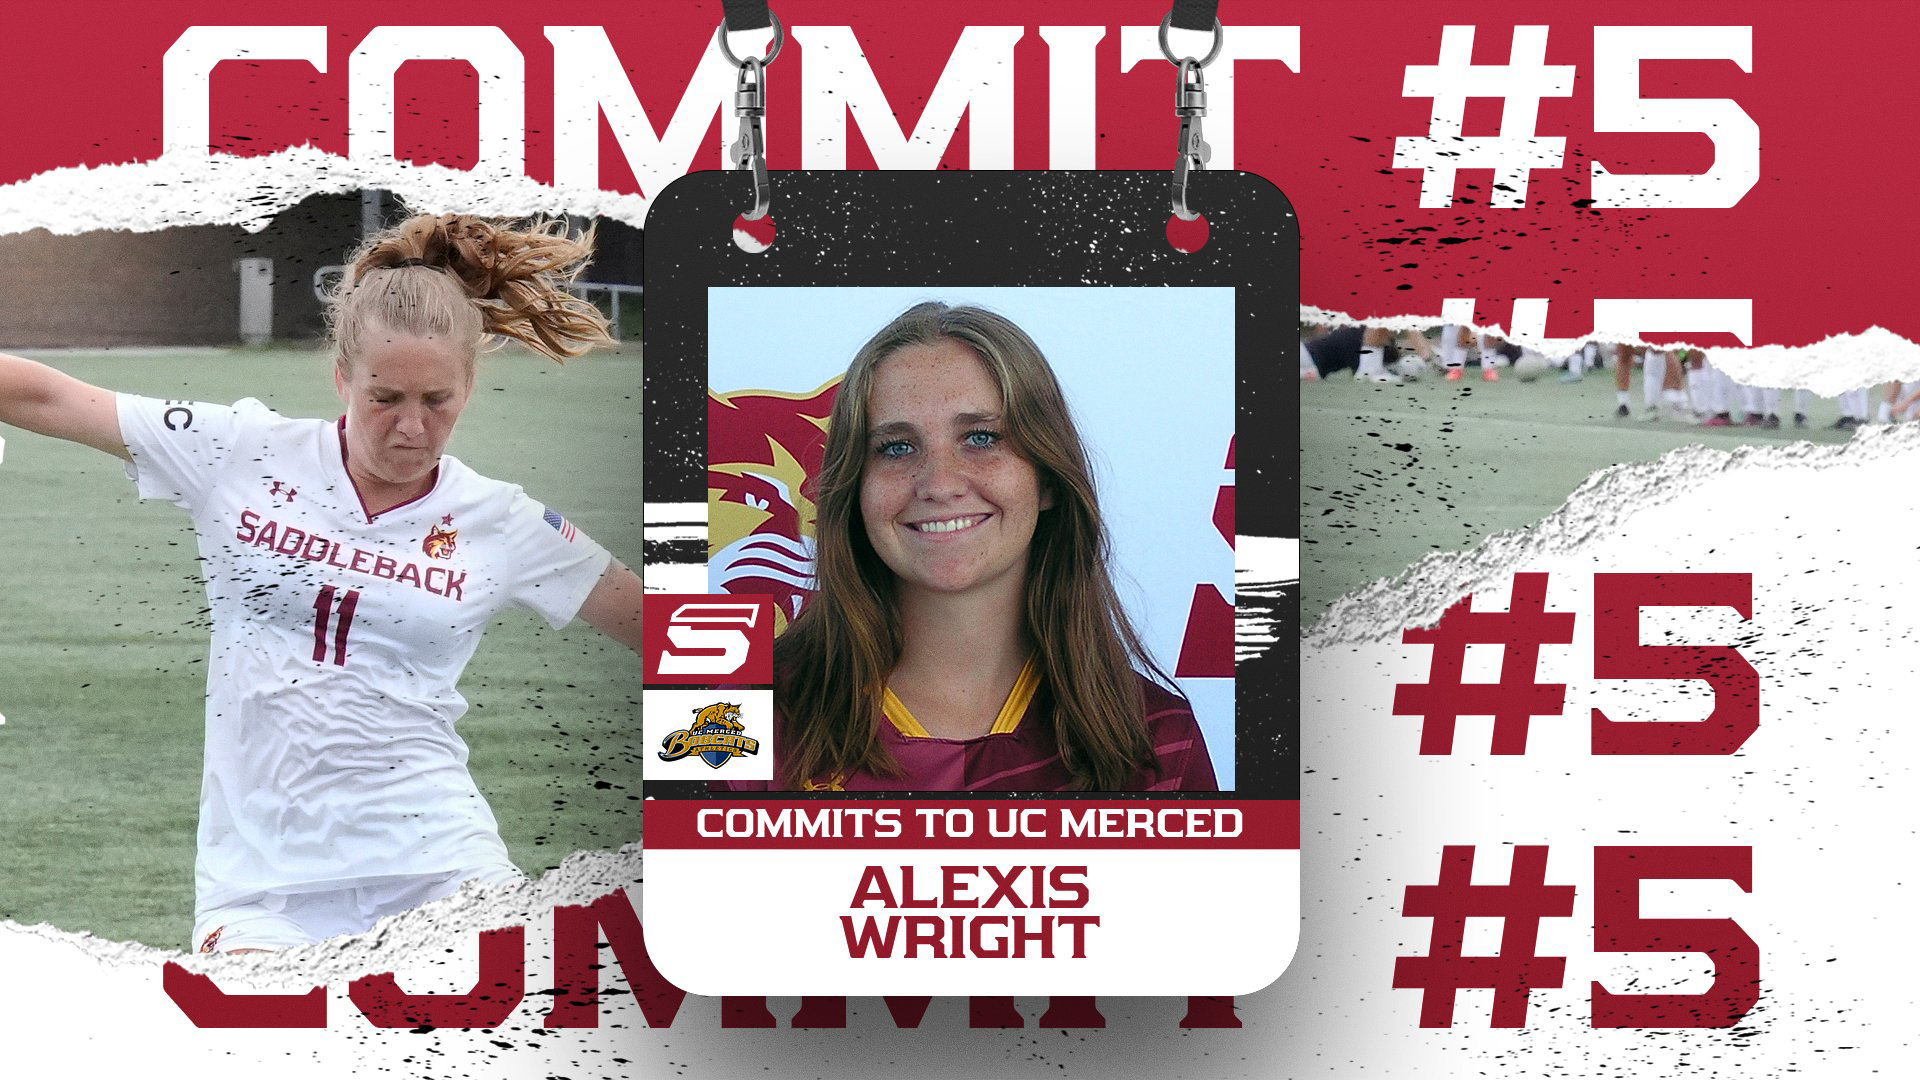 Wright is the latest commitment